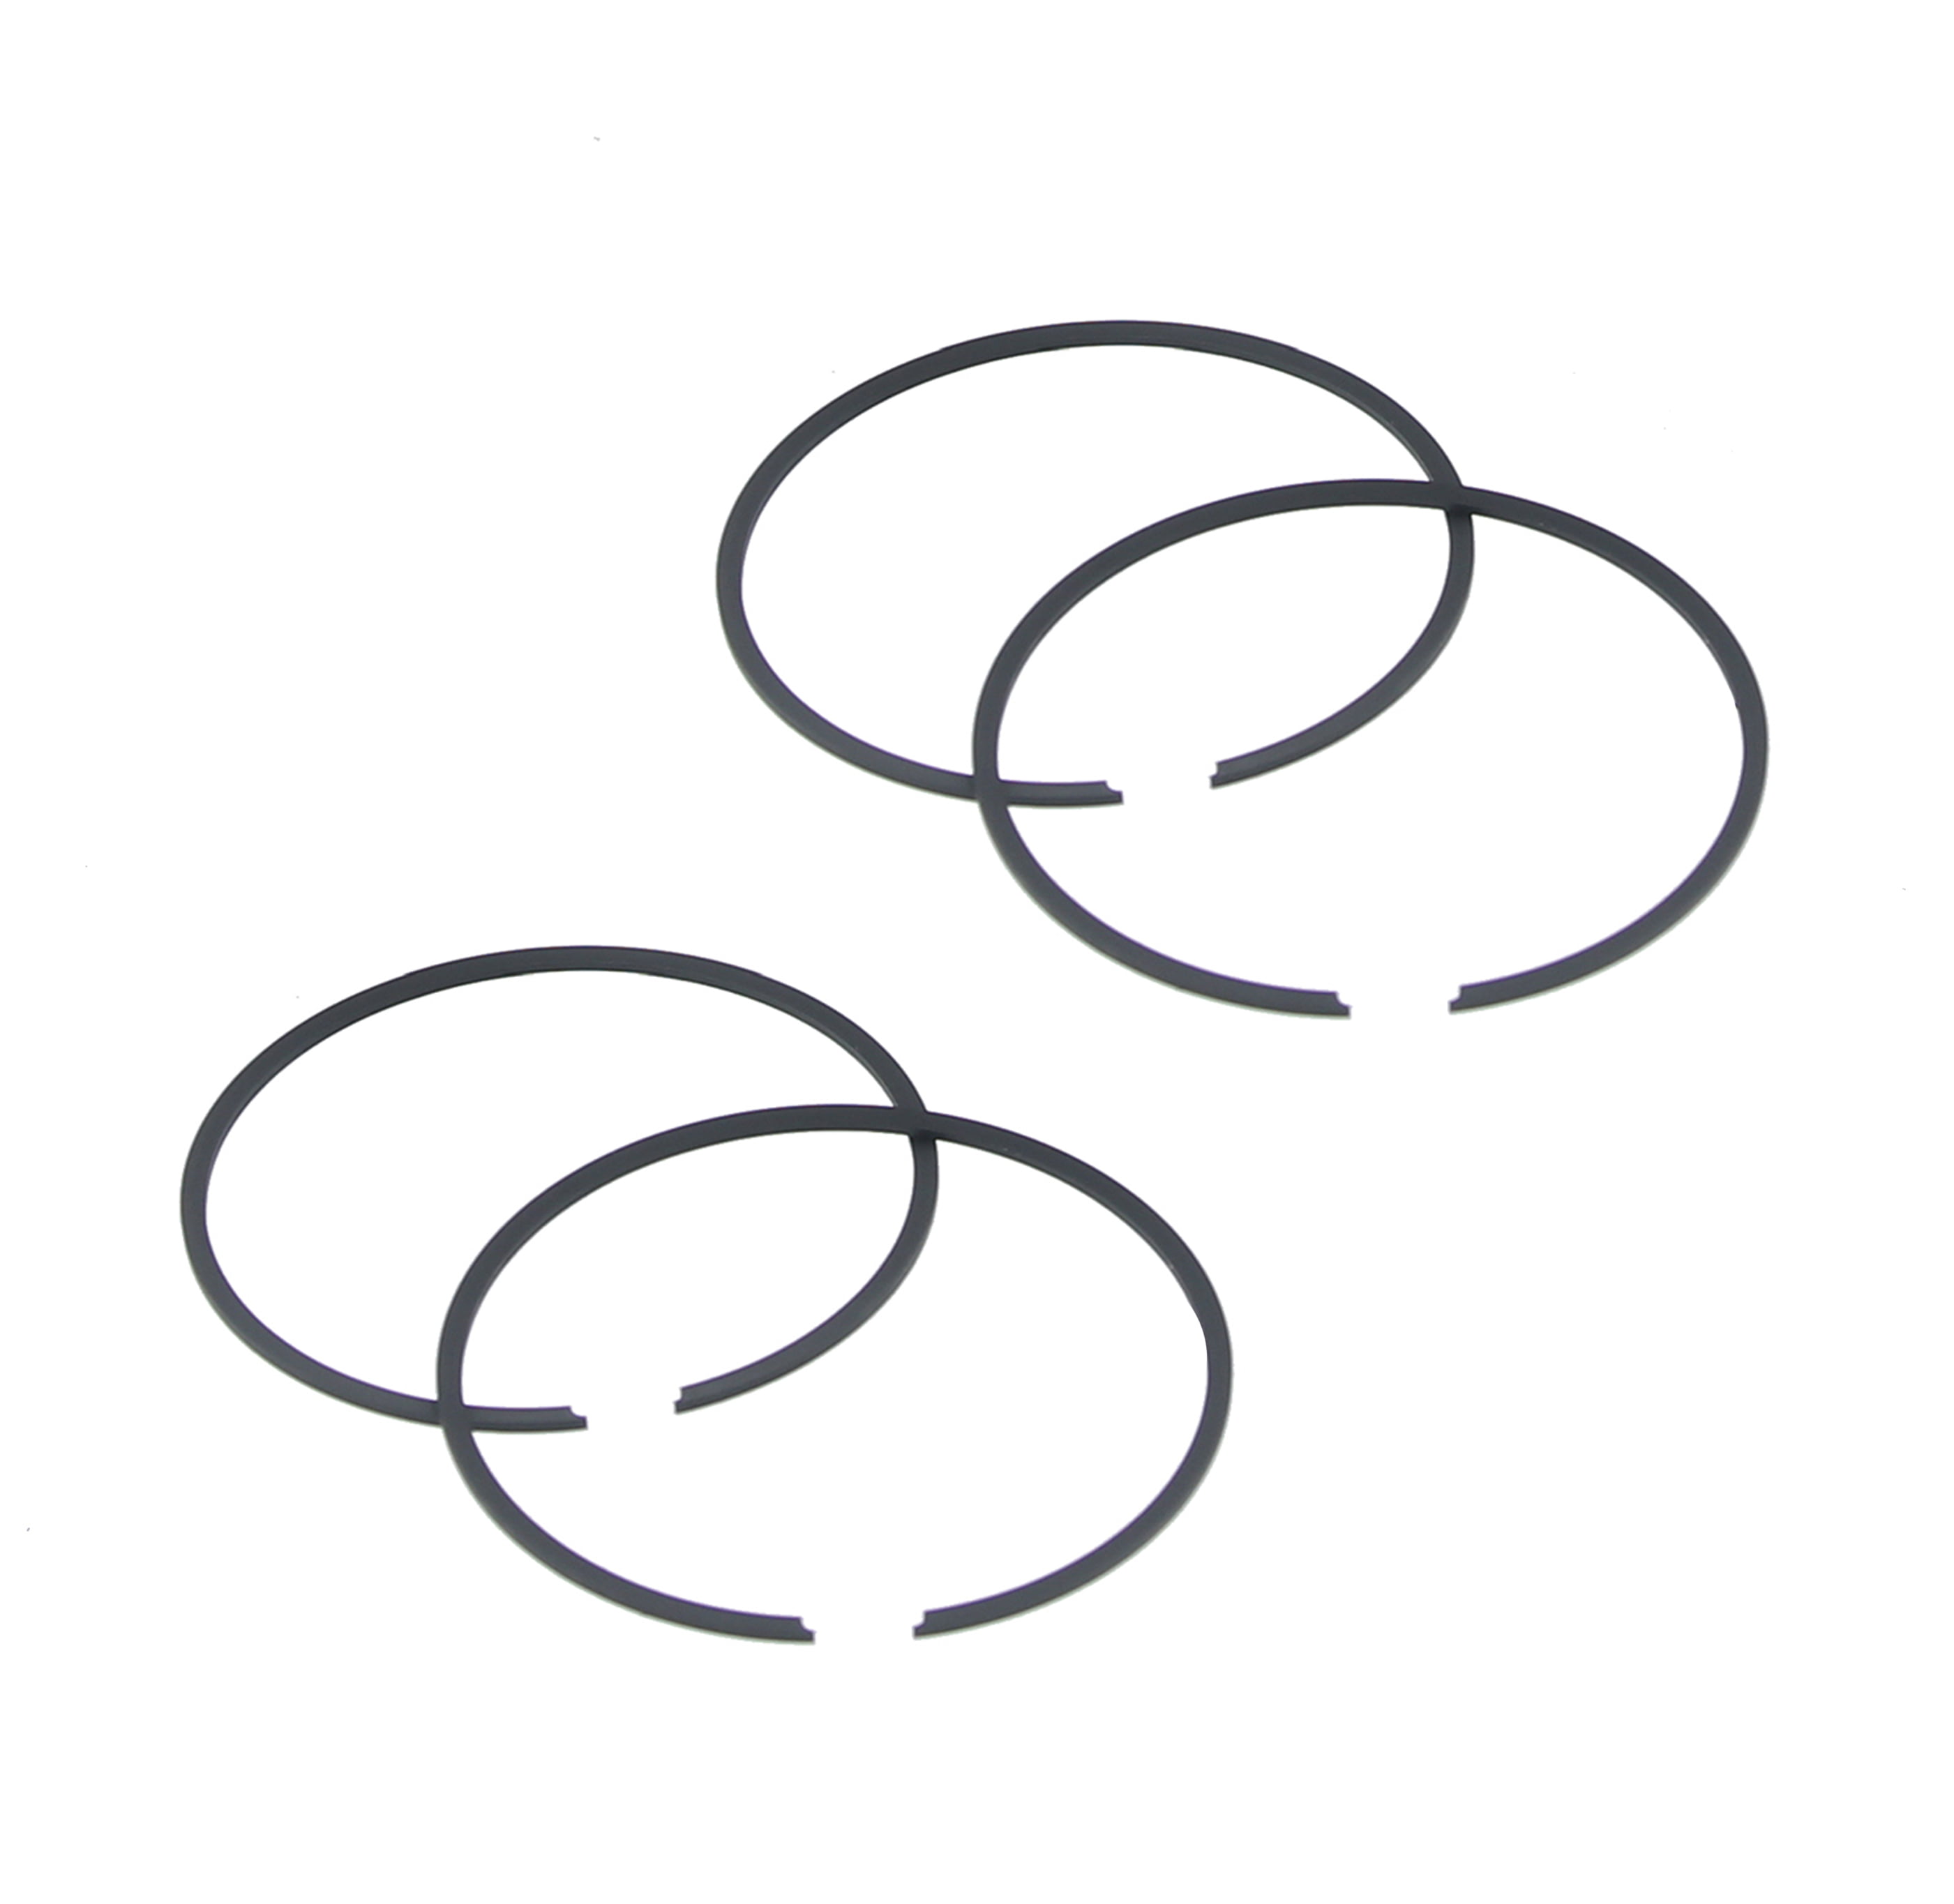 Piston Rings fit Polaris 500 Indy Classic Touring 1997-2000 by Race-Driven 